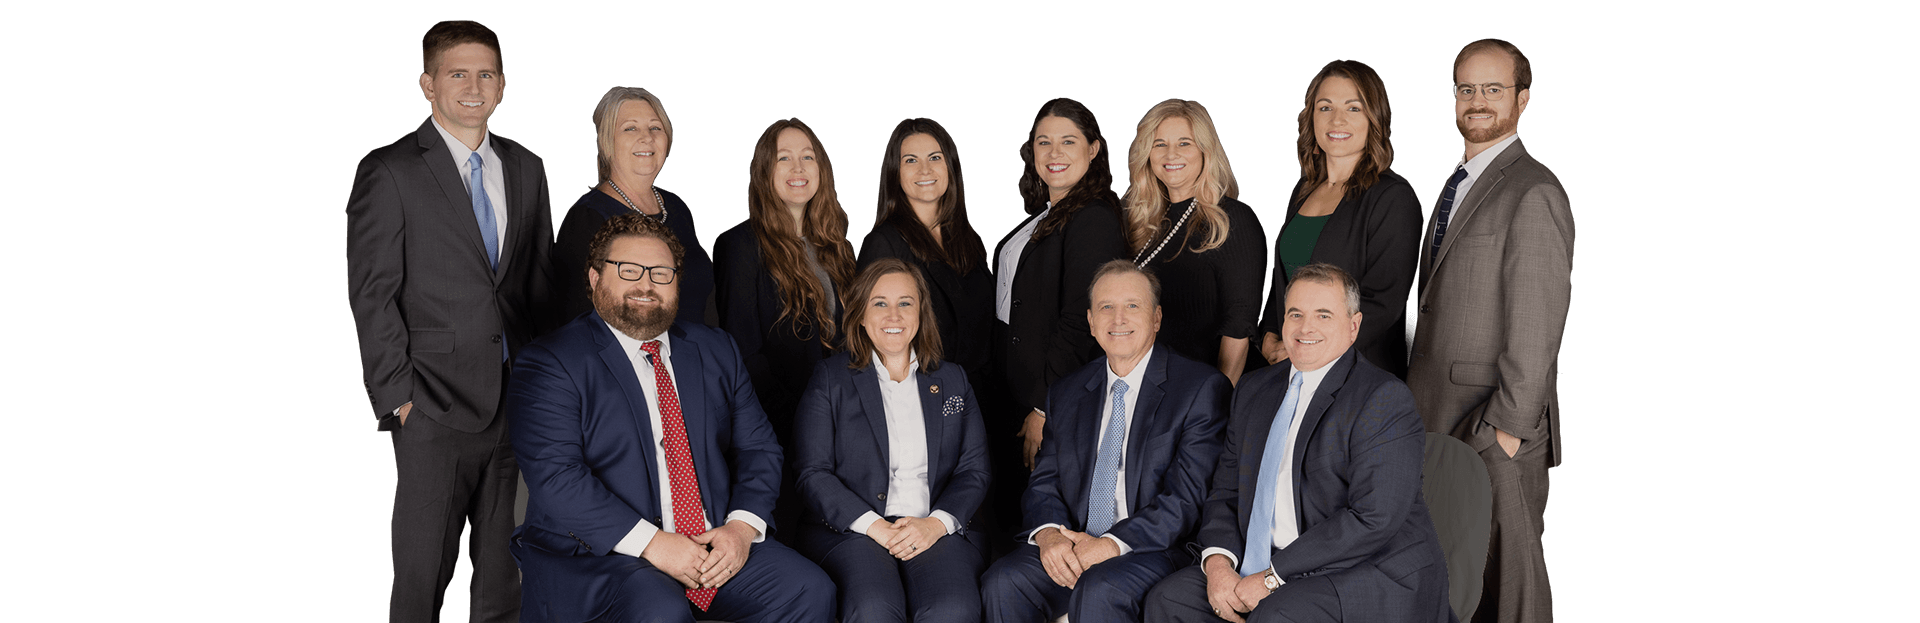 attorneys at Kiefer & Kiefer - new orleans personal injury law firm